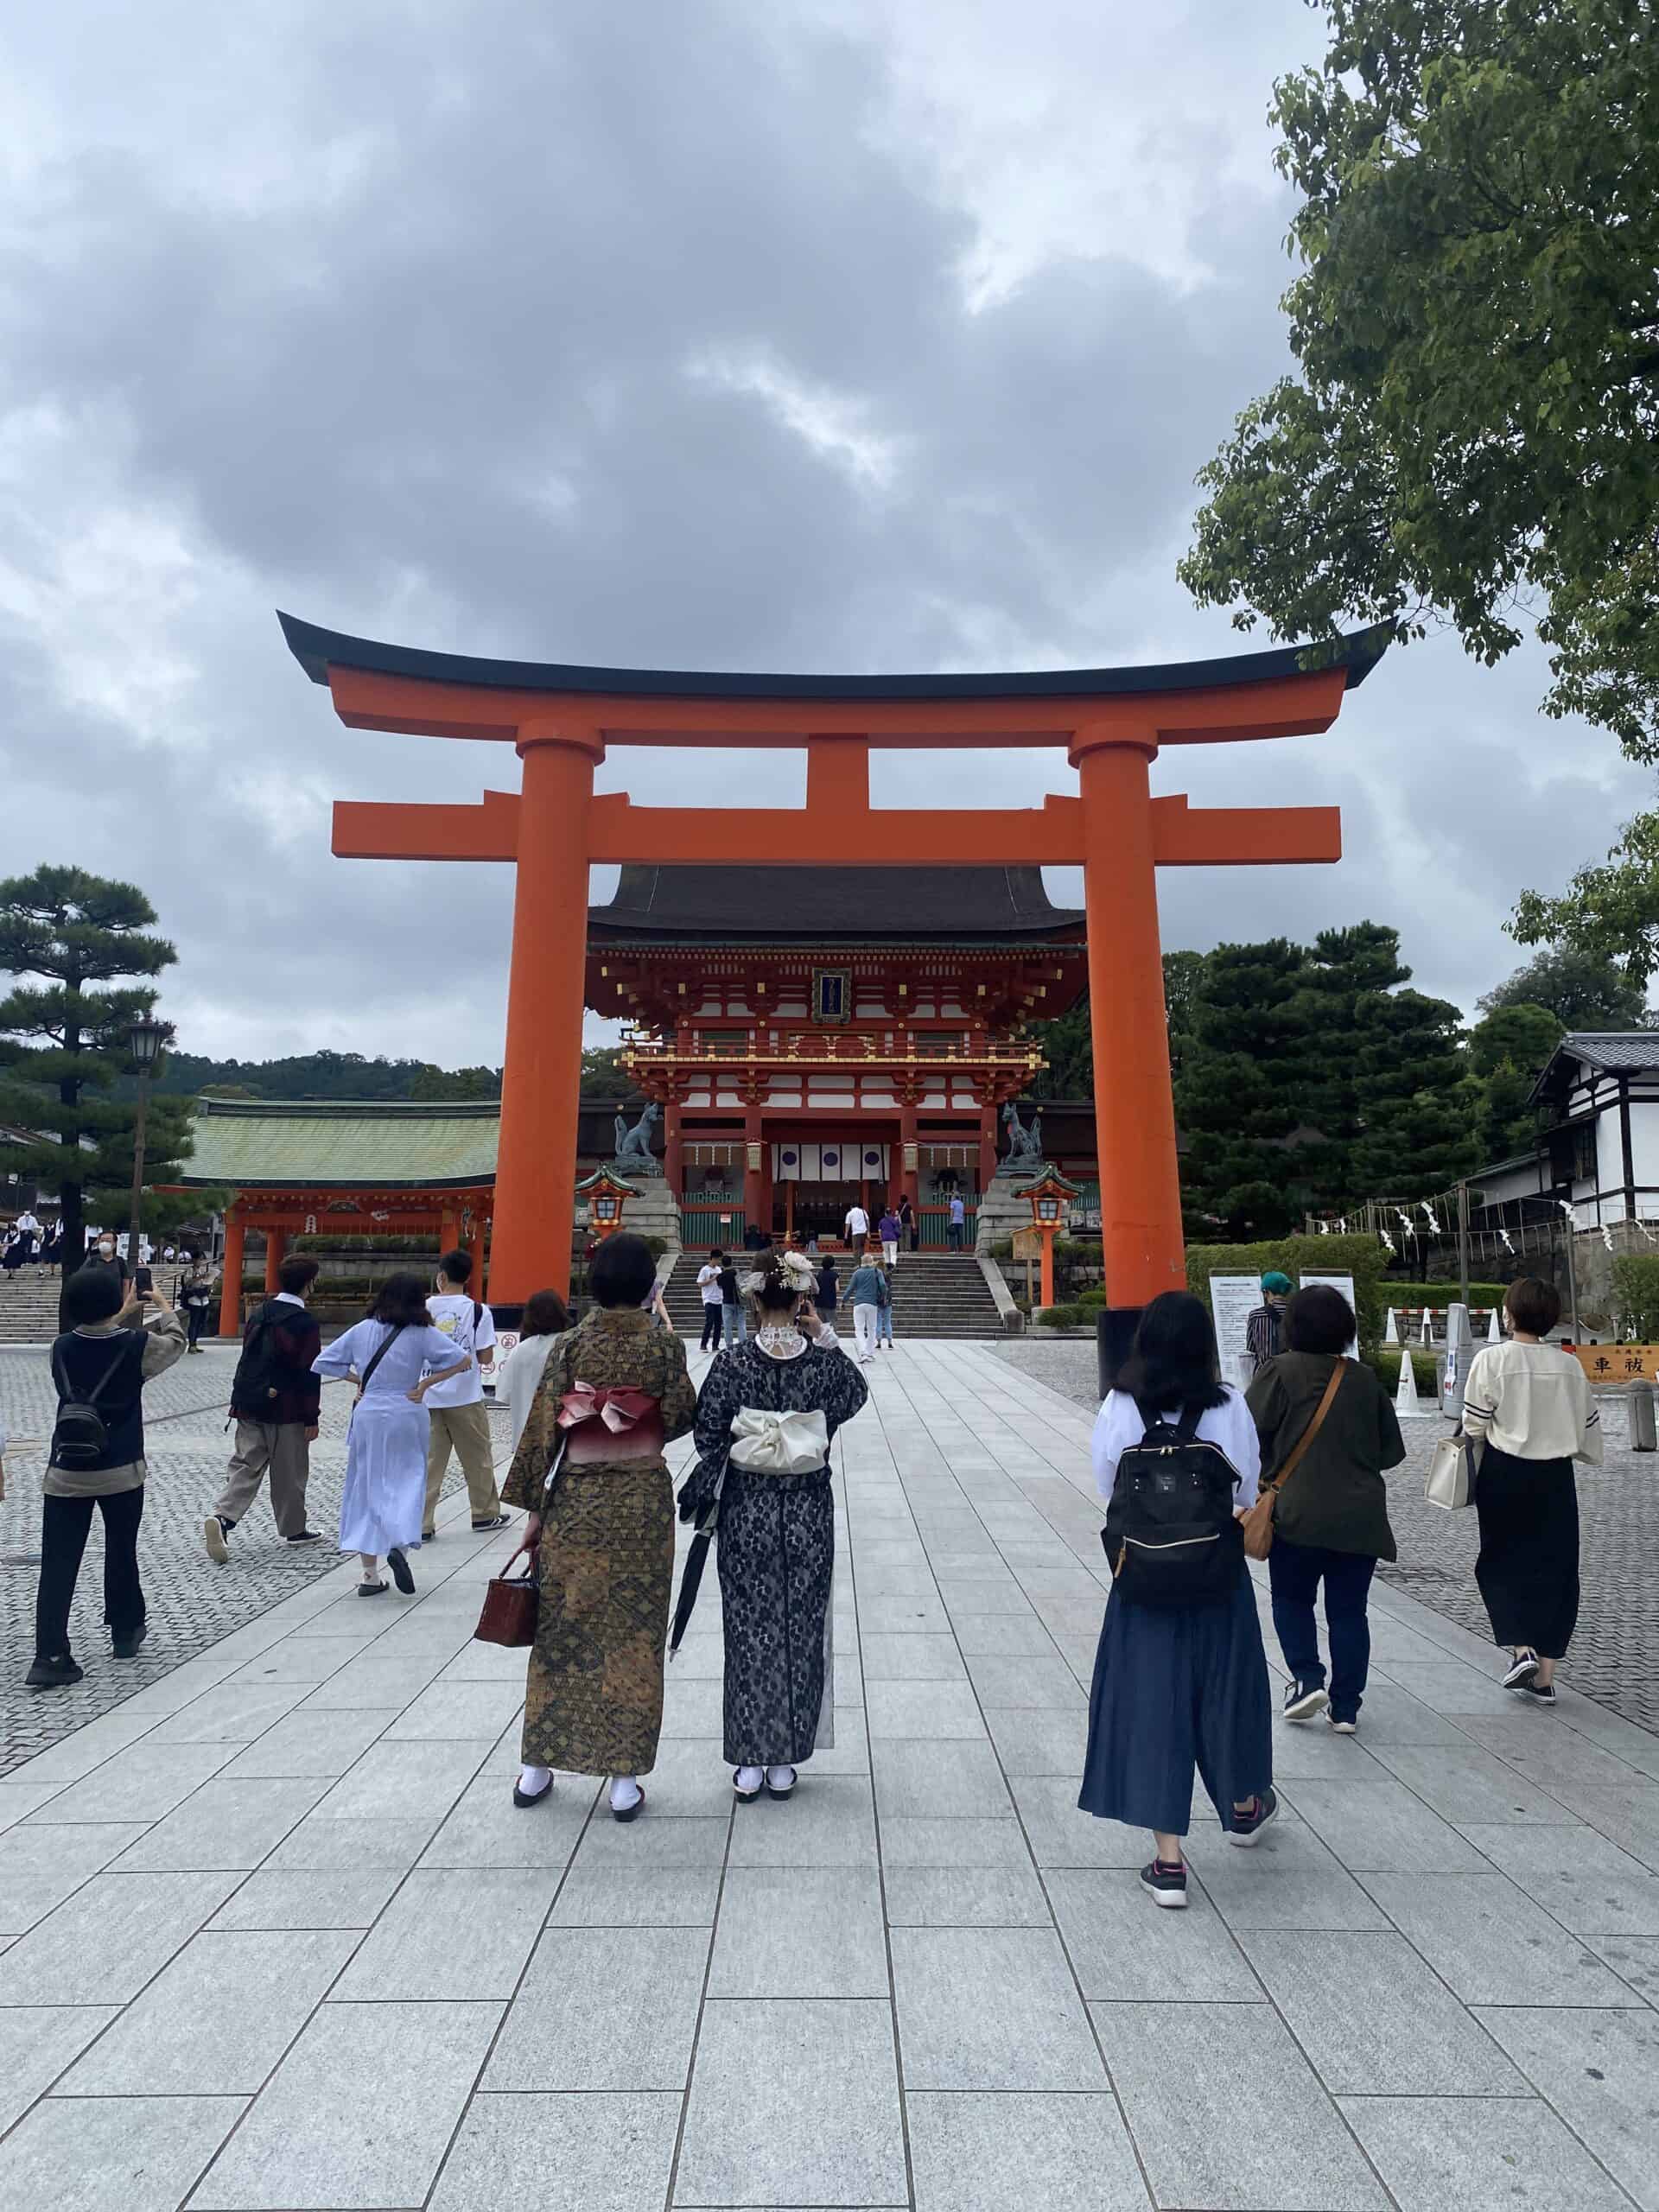 one of the larger red arches at a temple with people stonading in front wearing kimonos